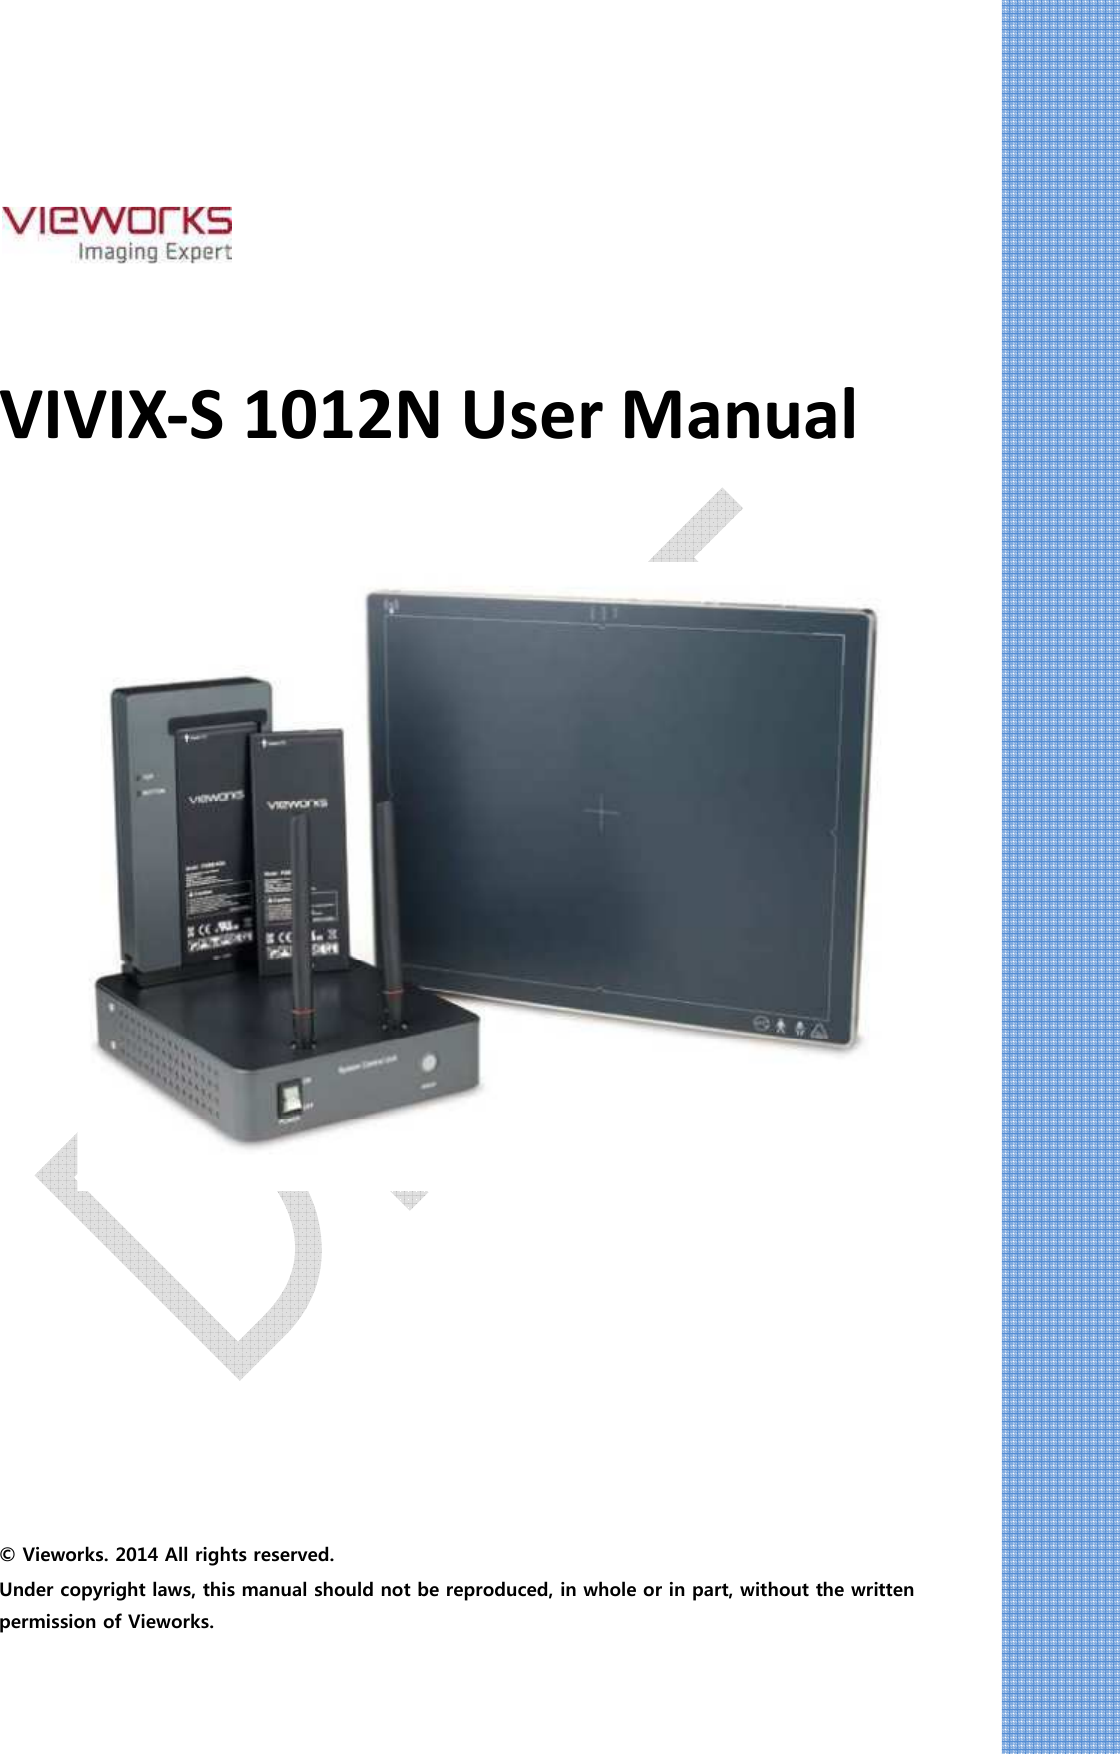       VIVIX-S 1012N User Manual               © Vieworks. 2014 All rights reserved. Under copyright laws, this manual should not be reproduced, in whole or in part, without the written permission of Vieworks. 